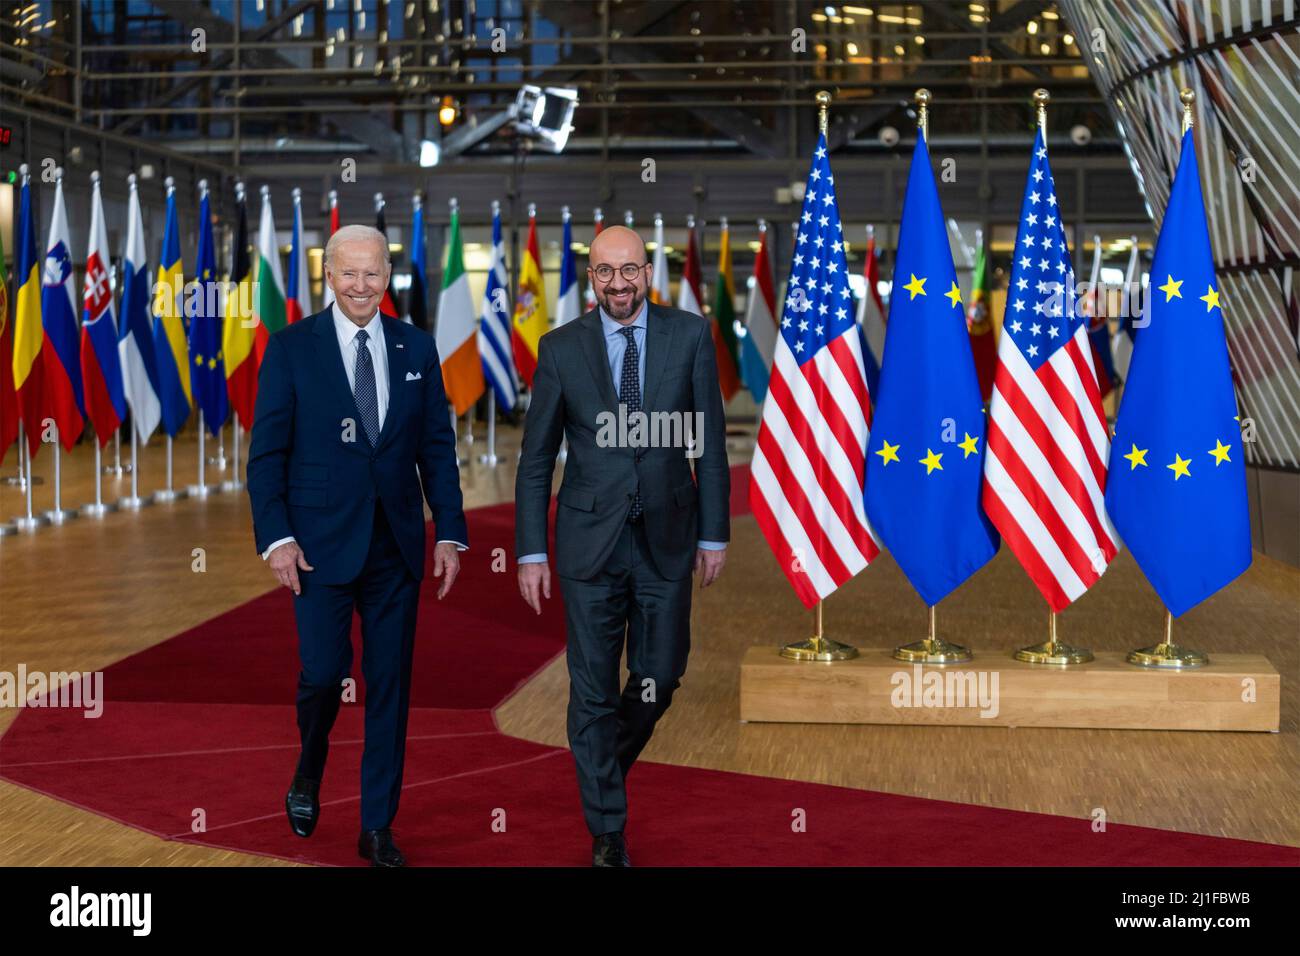 Brussels, Belgium. 24th Mar, 2022. U.S President Joe Biden, walks with European Council President Charles Michel, right, during the emergency meeting of the G7 nations at NATO headquarters, March 24, 2022 in Brussels, Belgium. Biden is hoping allied nations will continue to ramp up pressure on Russia as Ukraine marks a month since the invasion. Credit: Adam Schultz/White House Photo/Alamy Live News Stock Photo